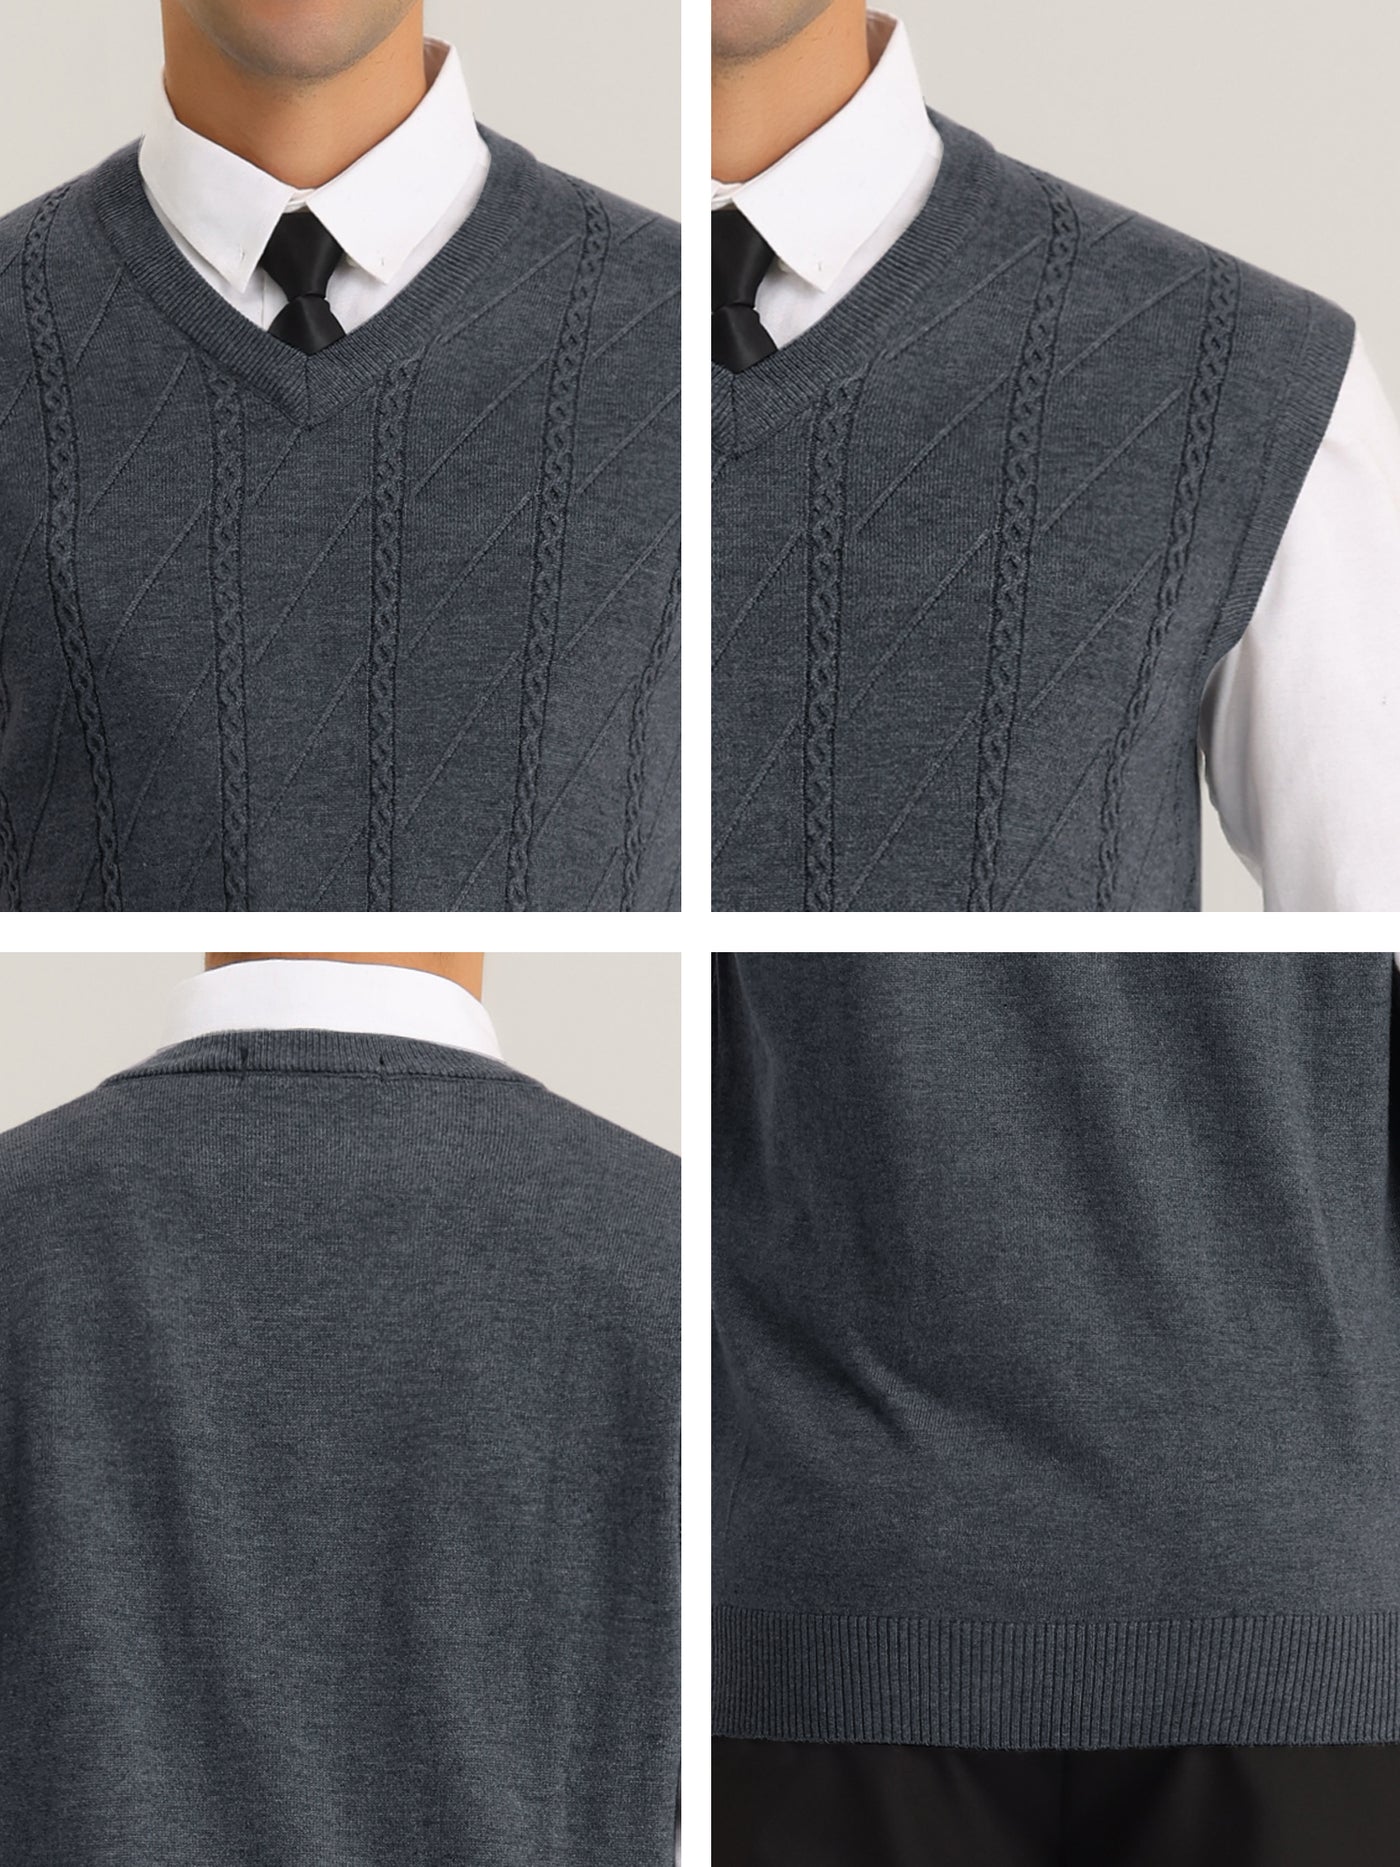 Bublédon Men's Cable Knitted Slim Fit V-Neck Sleeveless Pullover Sweater Vest